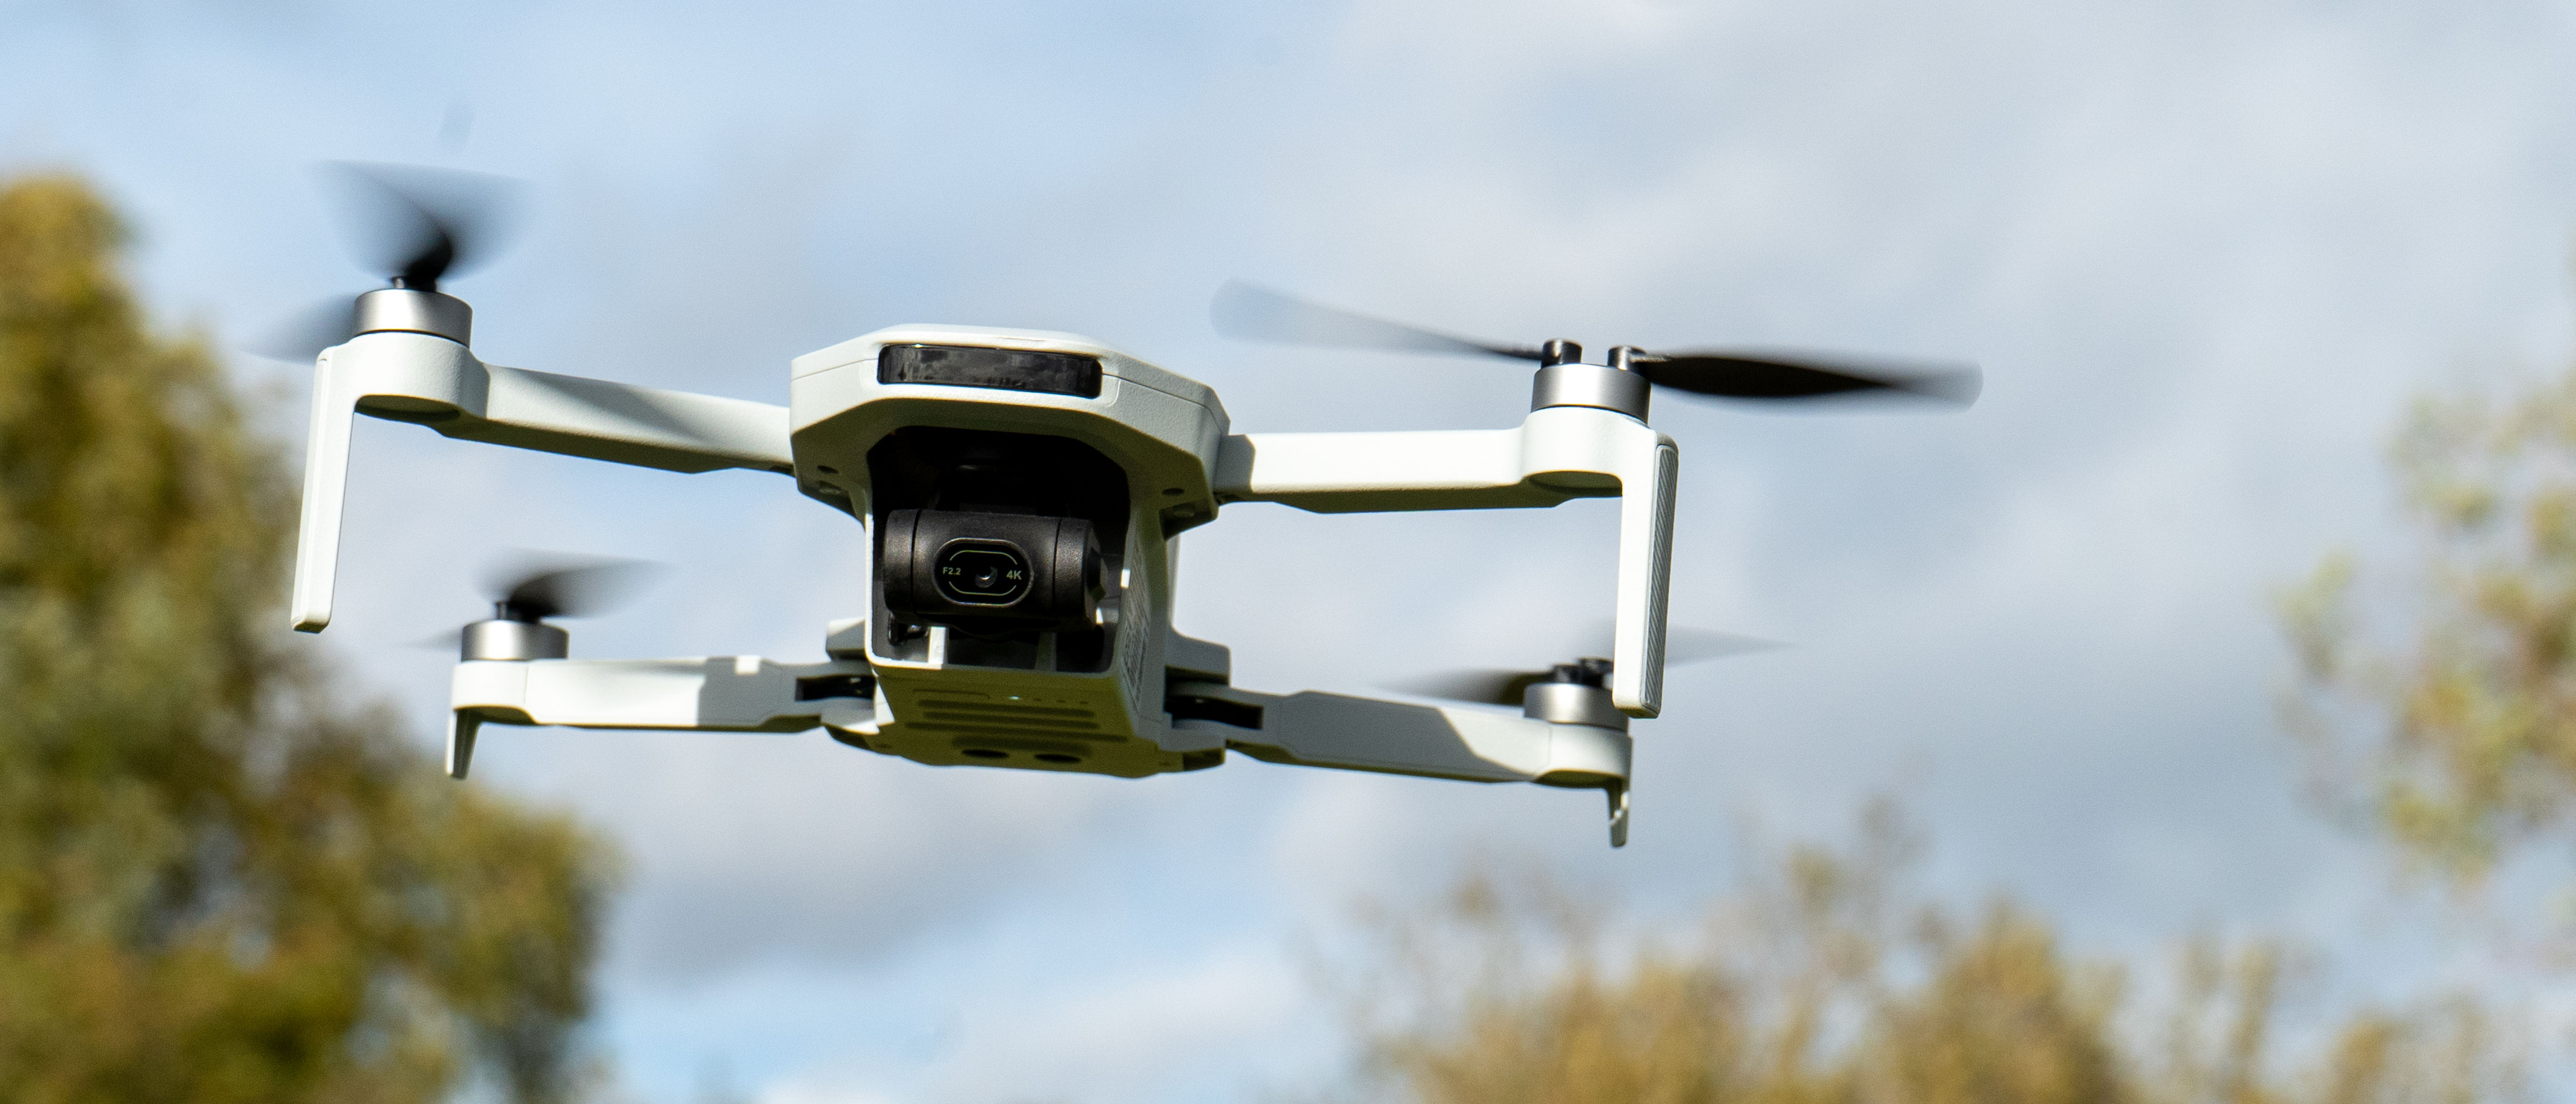 Potensic's latest Atom SE 4K drone captures 12MP RAW photos from the air at  low of $250